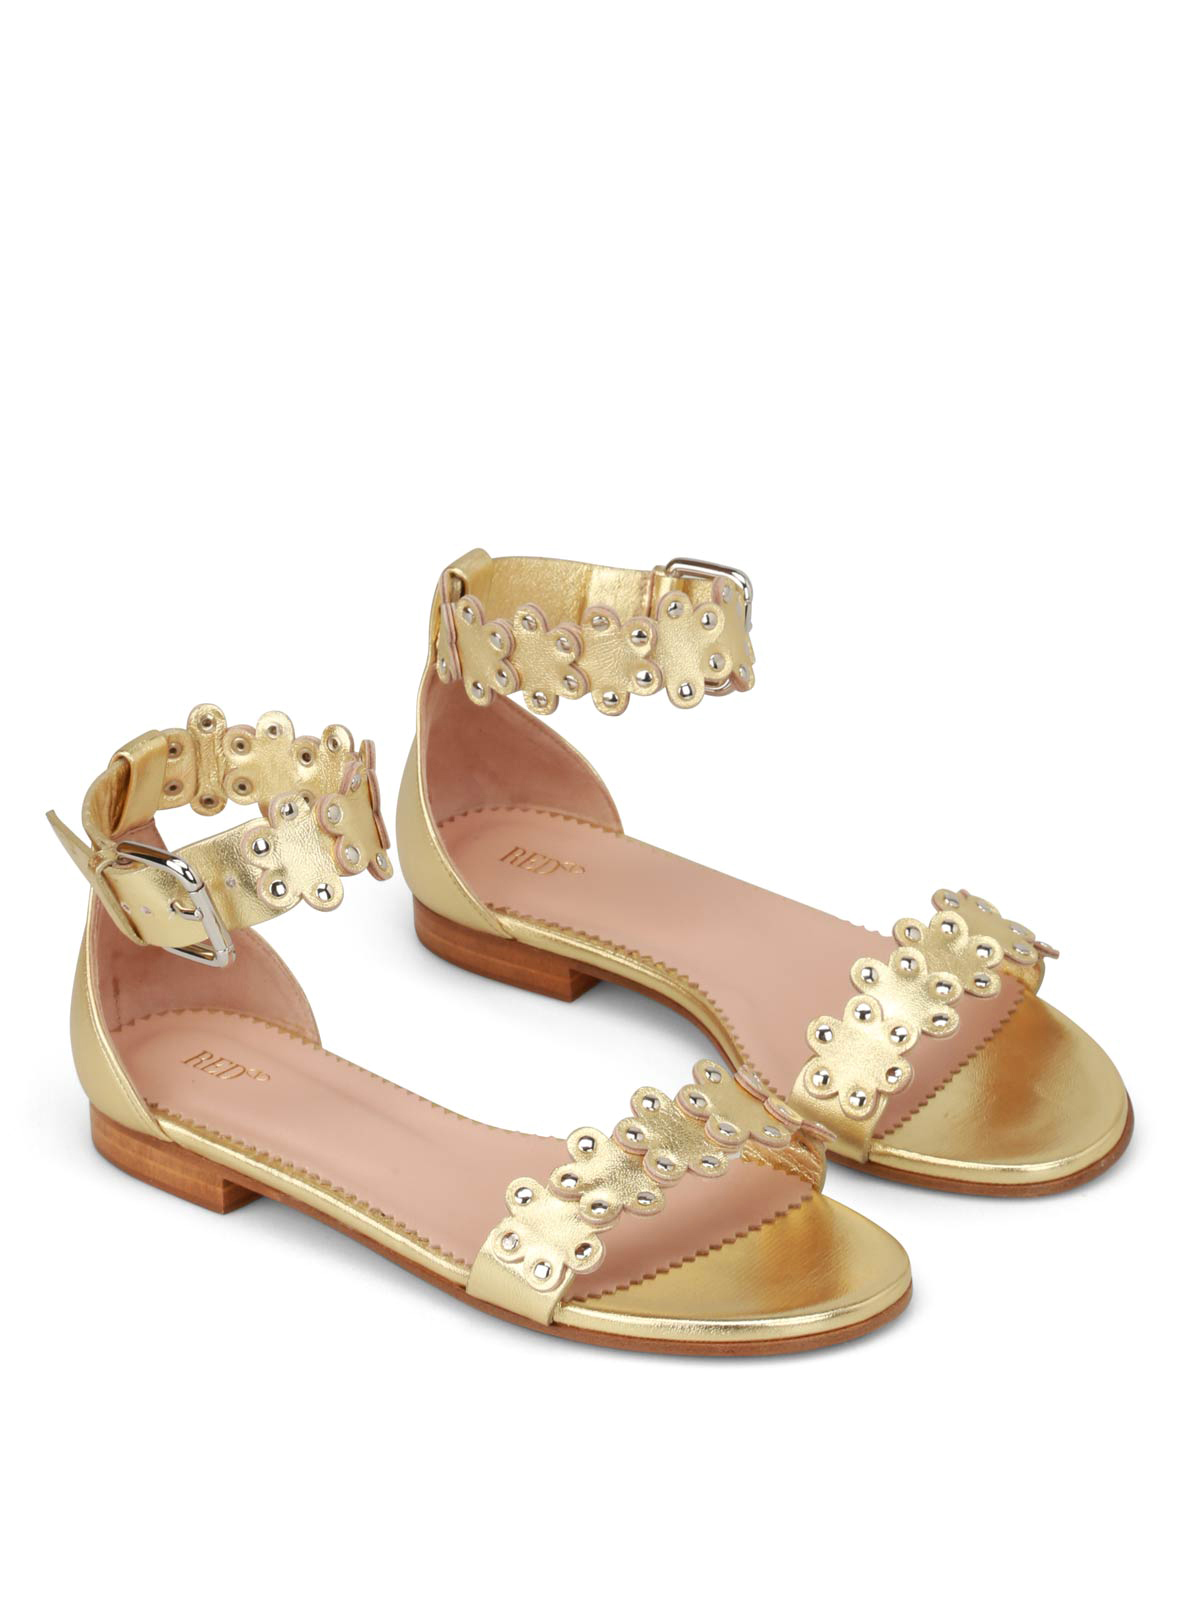 redde fajance Måling Sandals Valentino Red - Studded flowers gold sandals - PQ2S0A37UJAL01